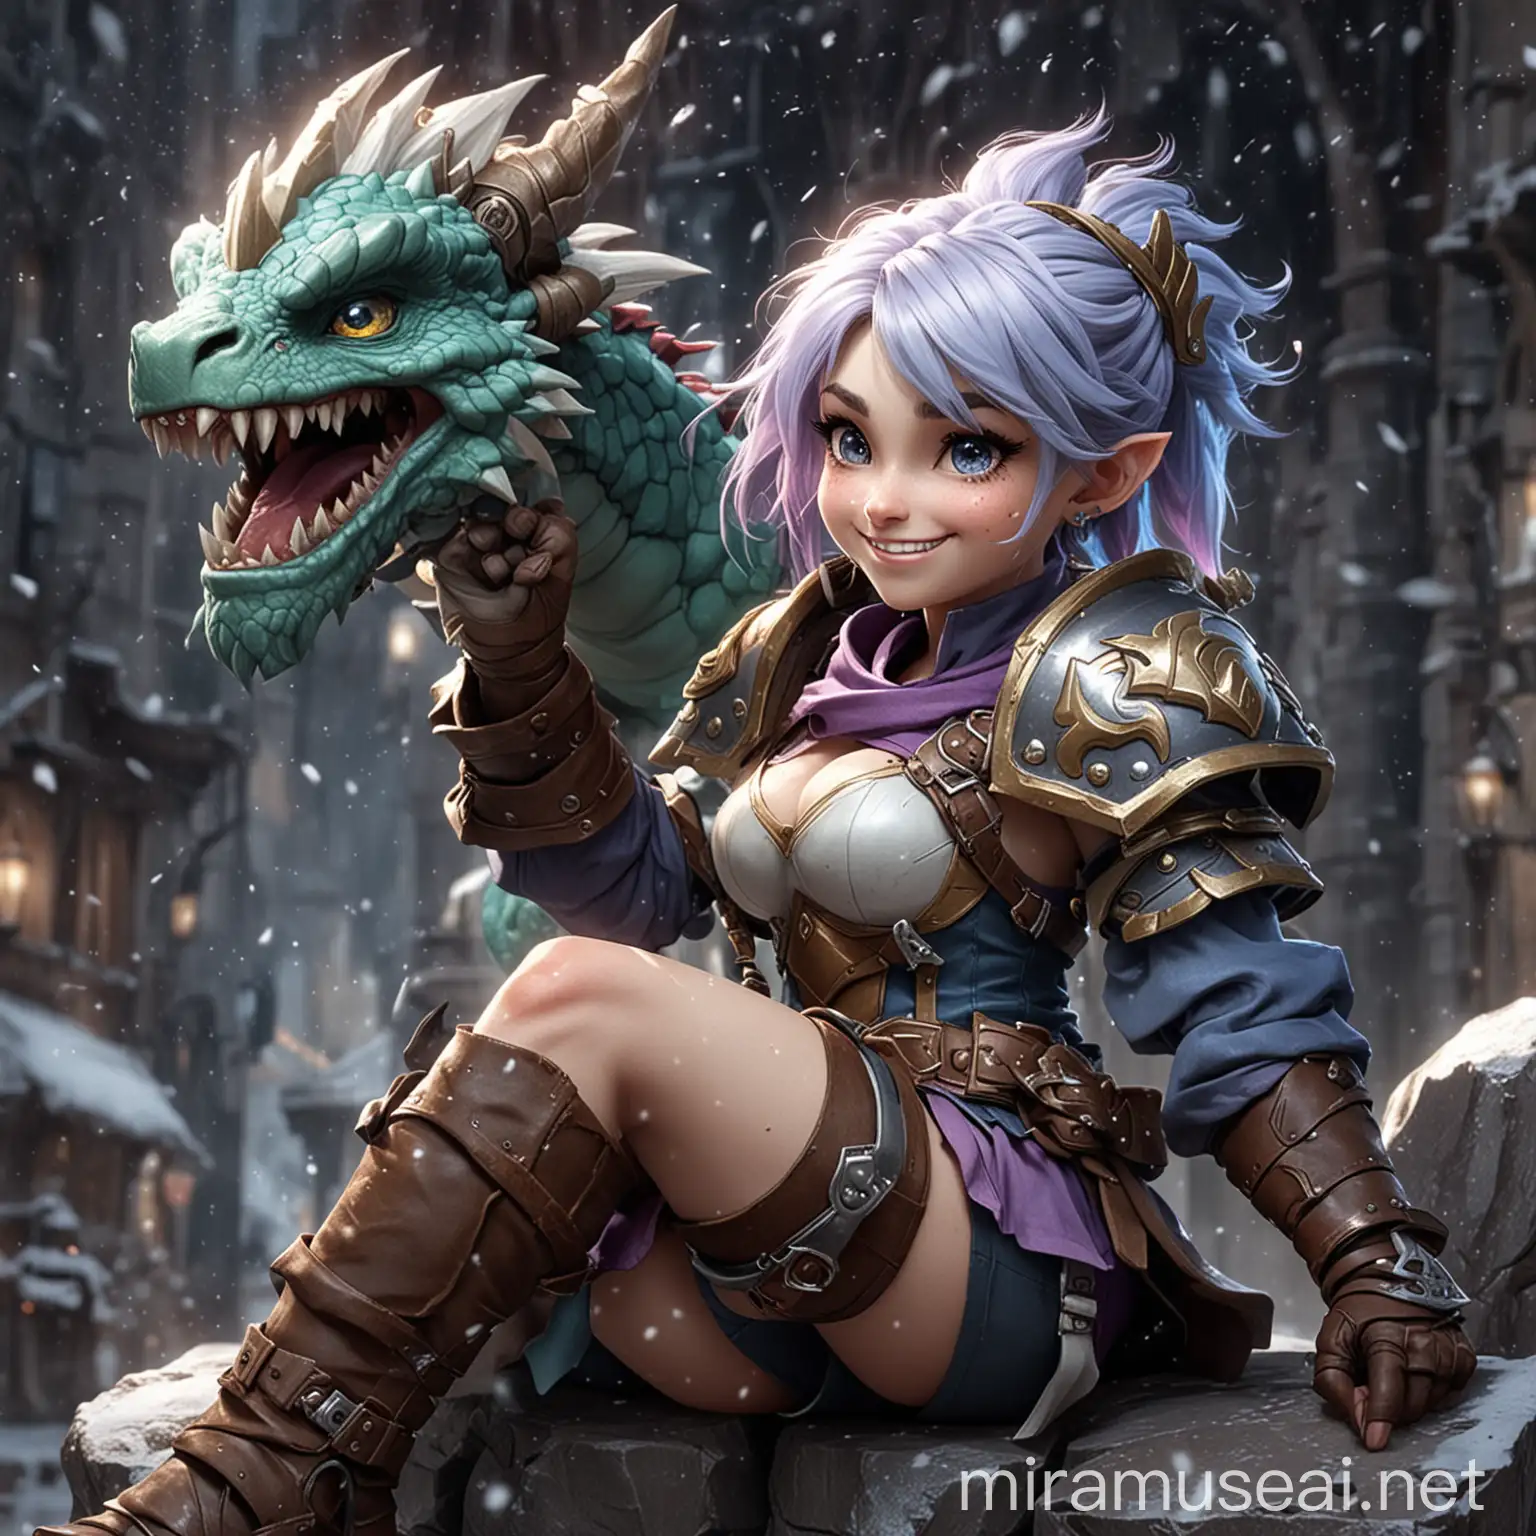 from league of legends charecters tristana (dragon trainer skin) is sitting on braum's right shoulder and having facial expression like XD (she's cracking up) while her small dragon is on her lap licking her and meanwhile braum (in crime city skin) is standing strong and smiling and blinking with his right eye and his left foot is on his vault shield and he's twisting his moustache with his left arm and for background they are on top of a cold and rocky mountain (dark gray for color of stones) and its snowing